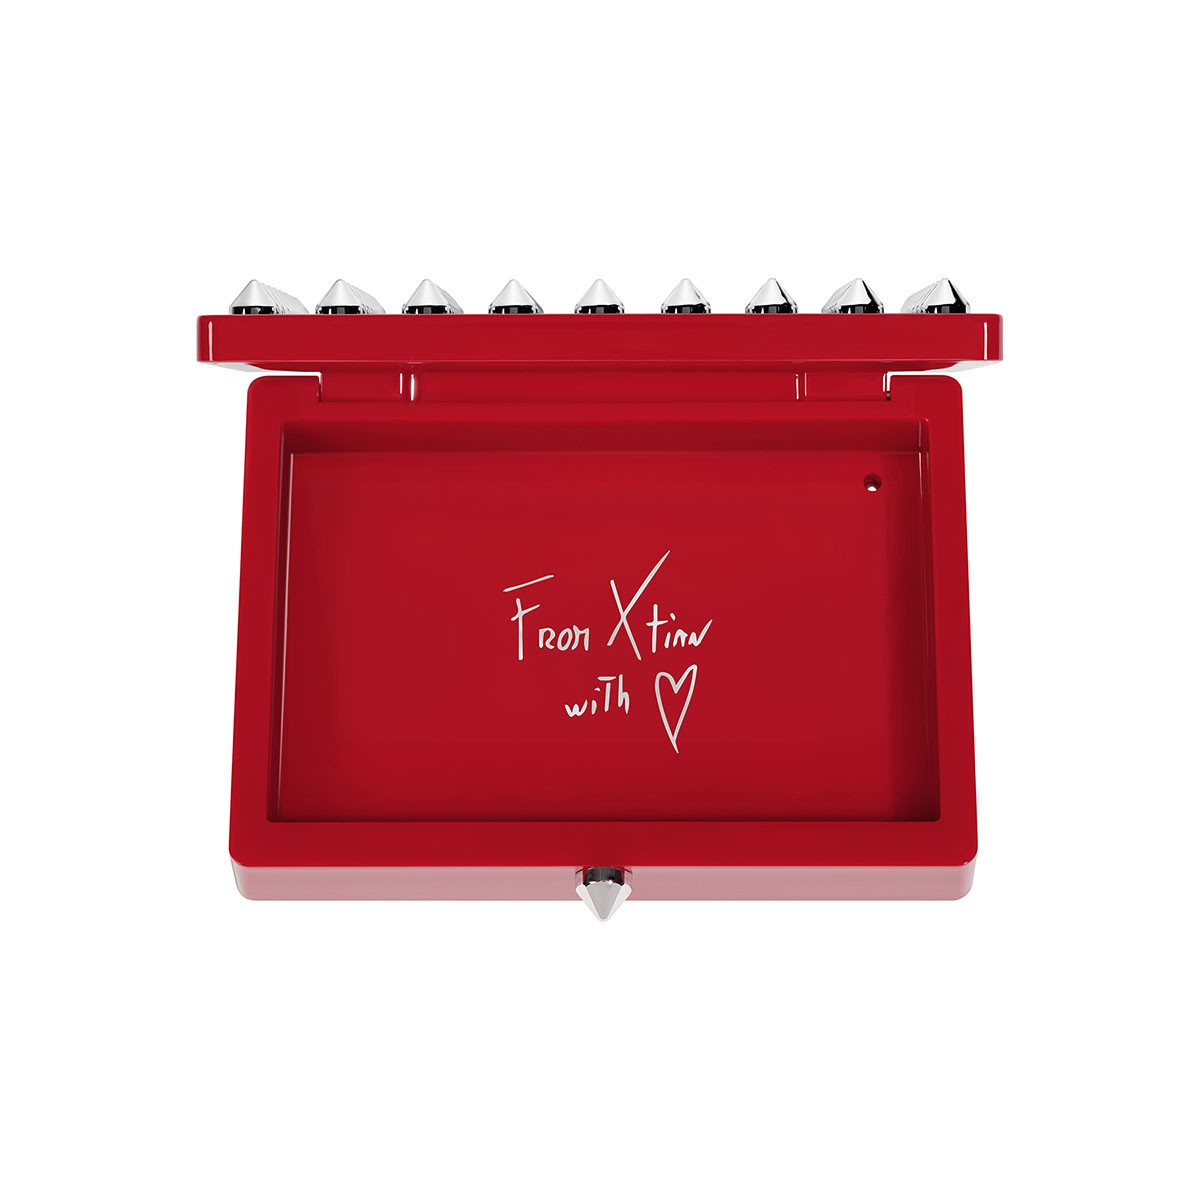 Red case - Christian Louboutin Beauty